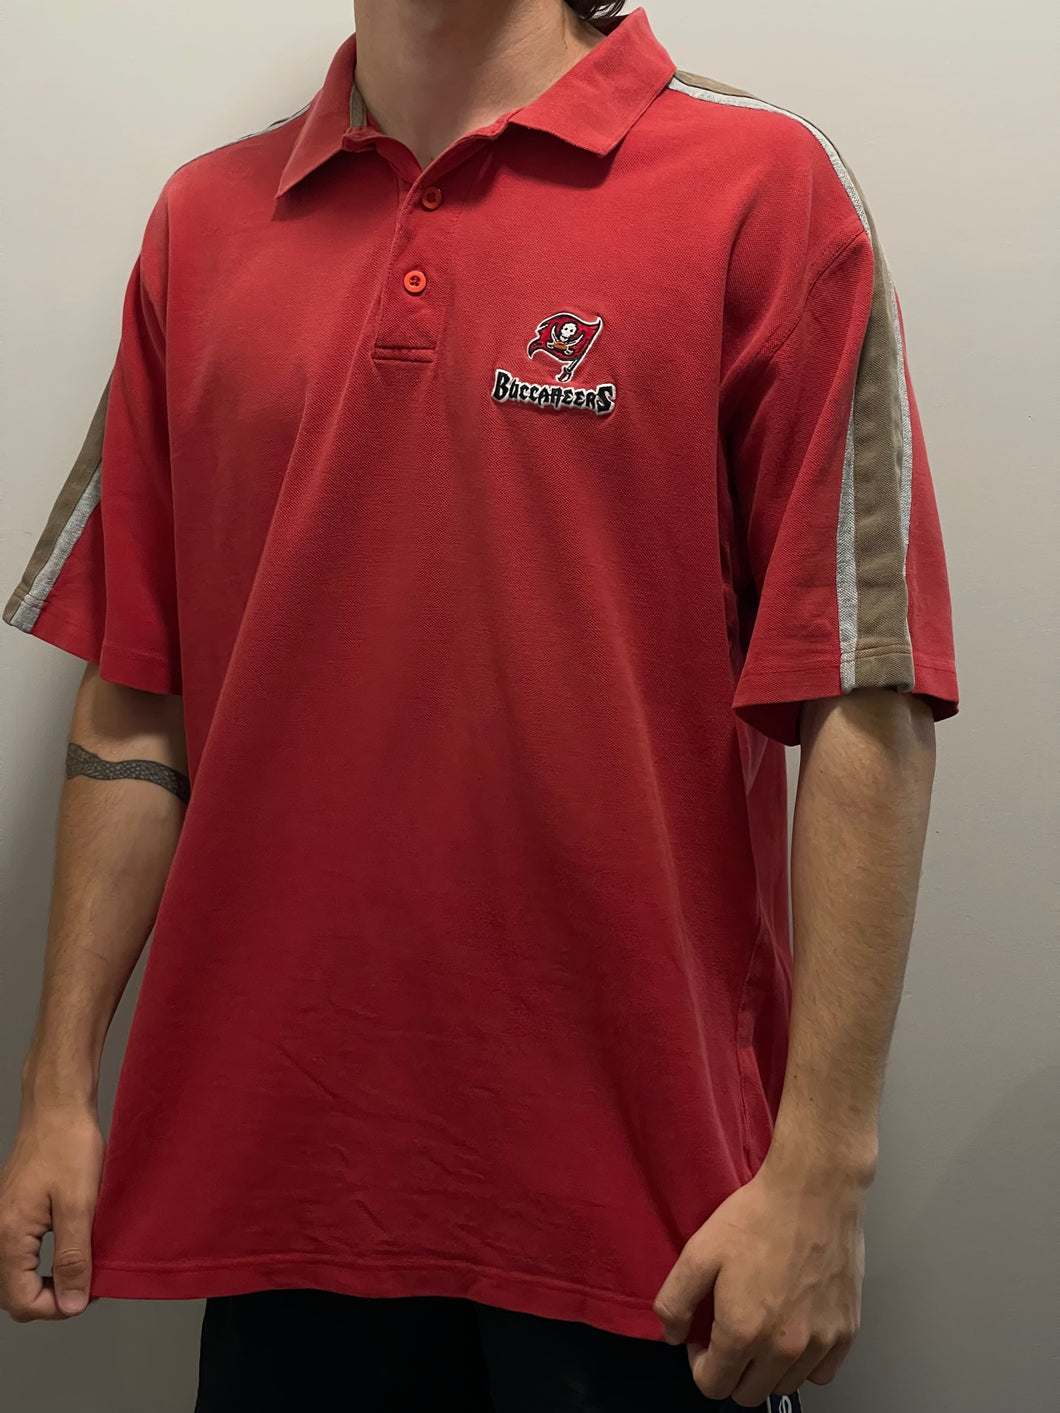 Tampa Bay Buccaneers Red Polo (XL)